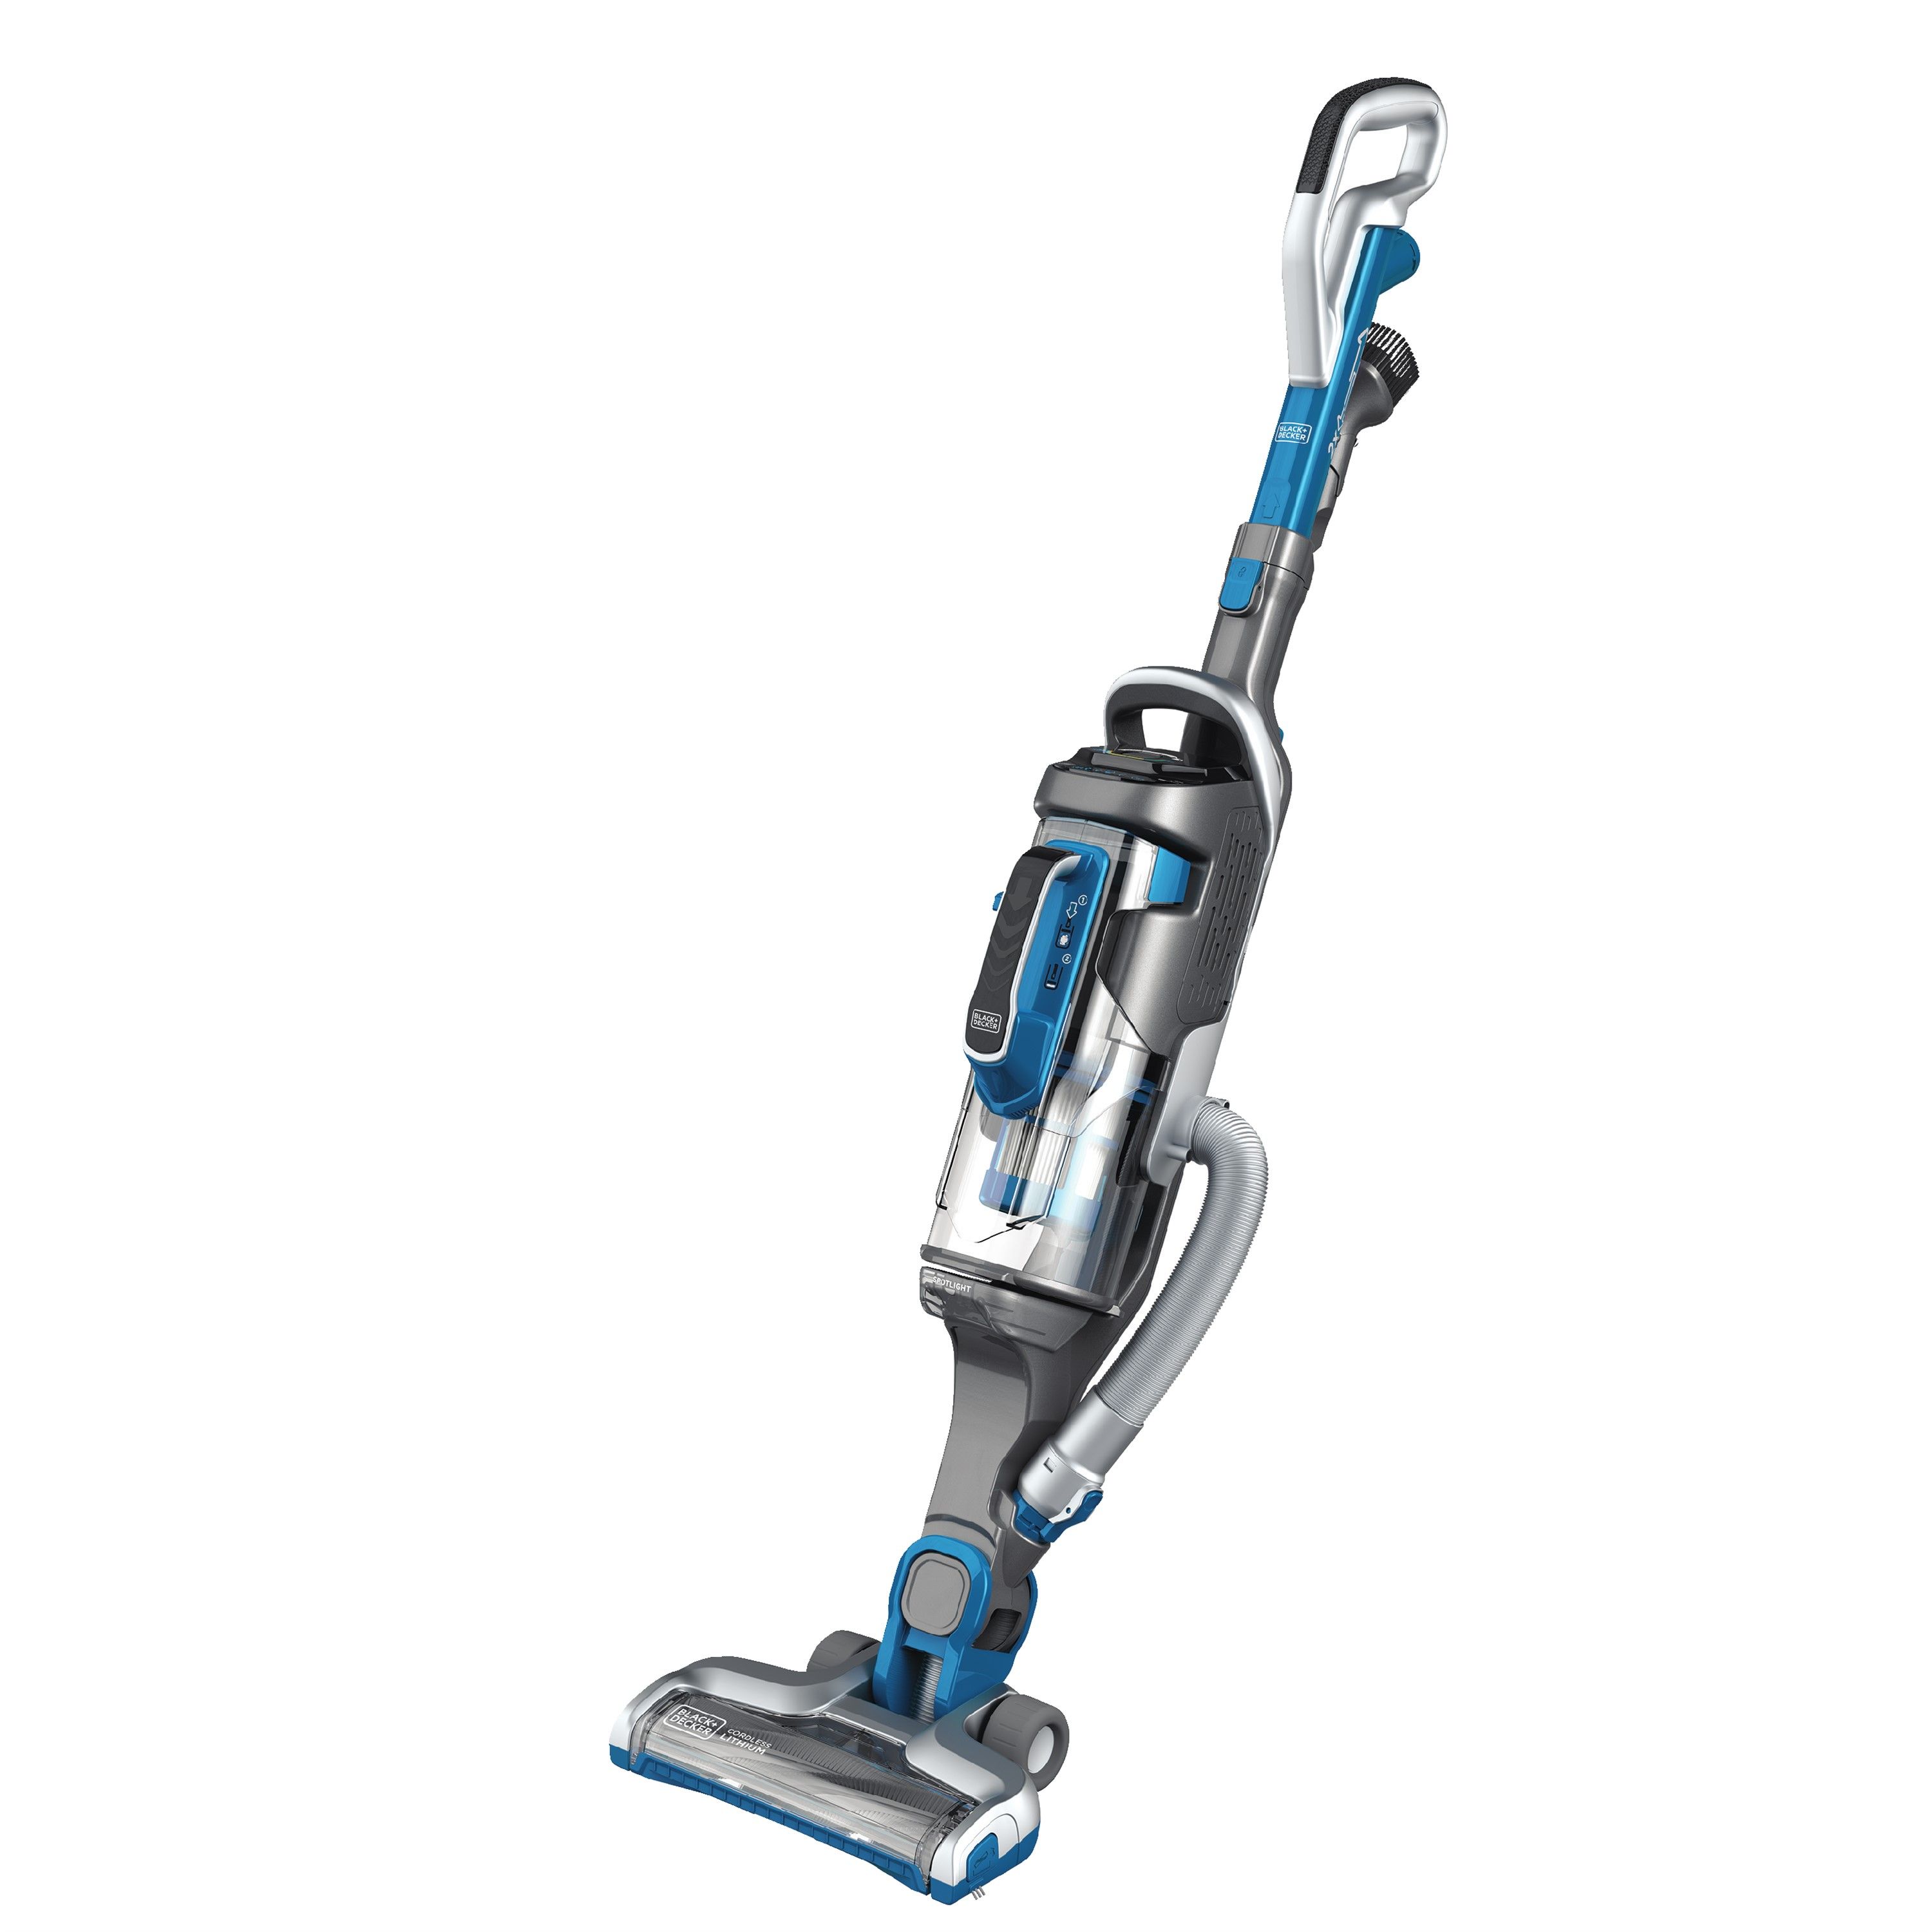 8 Best Vacuums For Hardwood Floors To, Best Vacuum For Hardwood Floors And Carpet Cordless